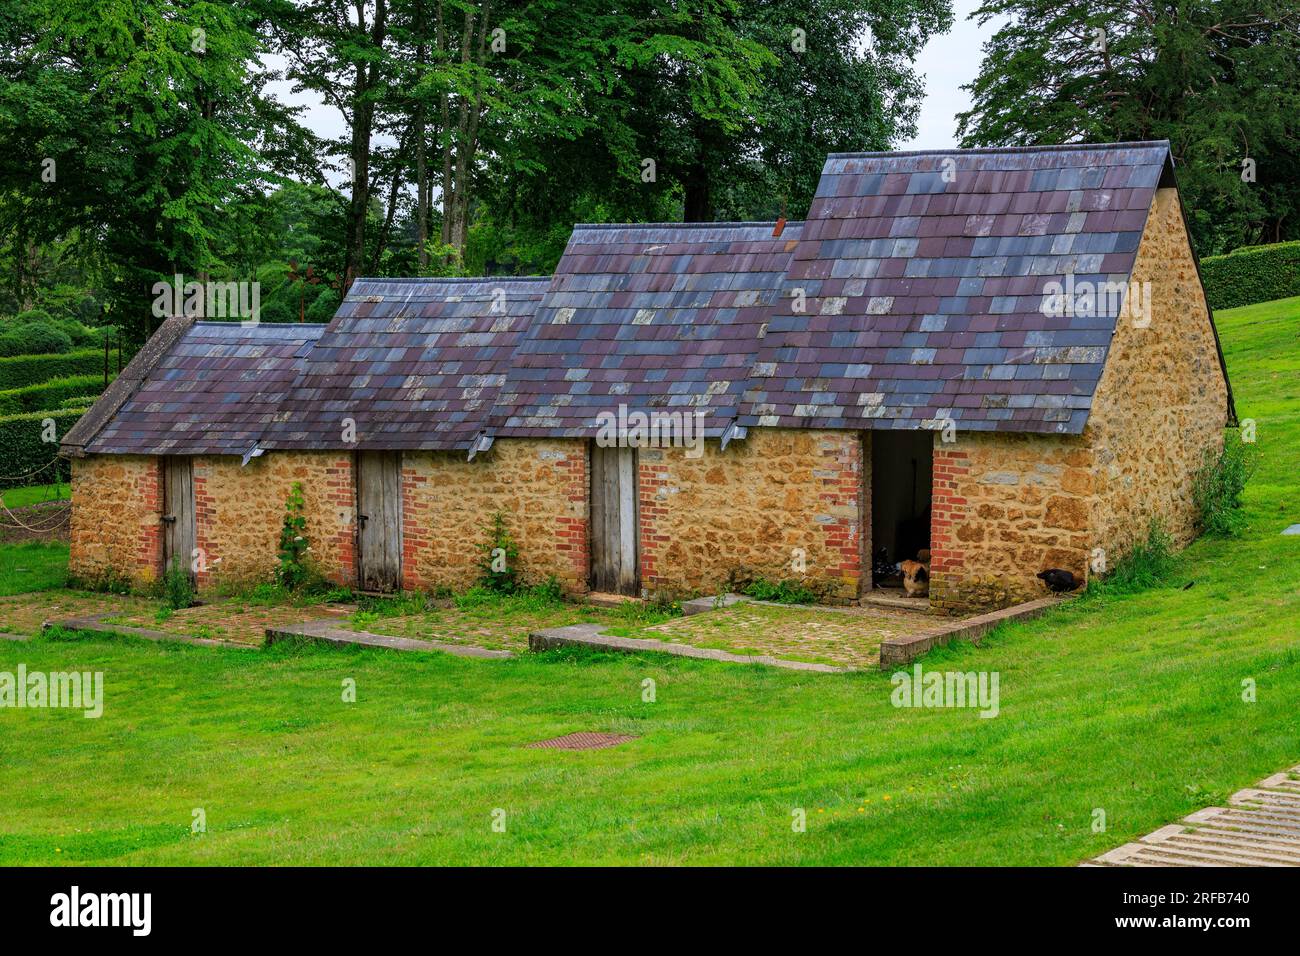 The interesting stepped slate roofs of the Fowl House at 'The Newt in Somerset', nr Bruton, England, UK Stock Photo